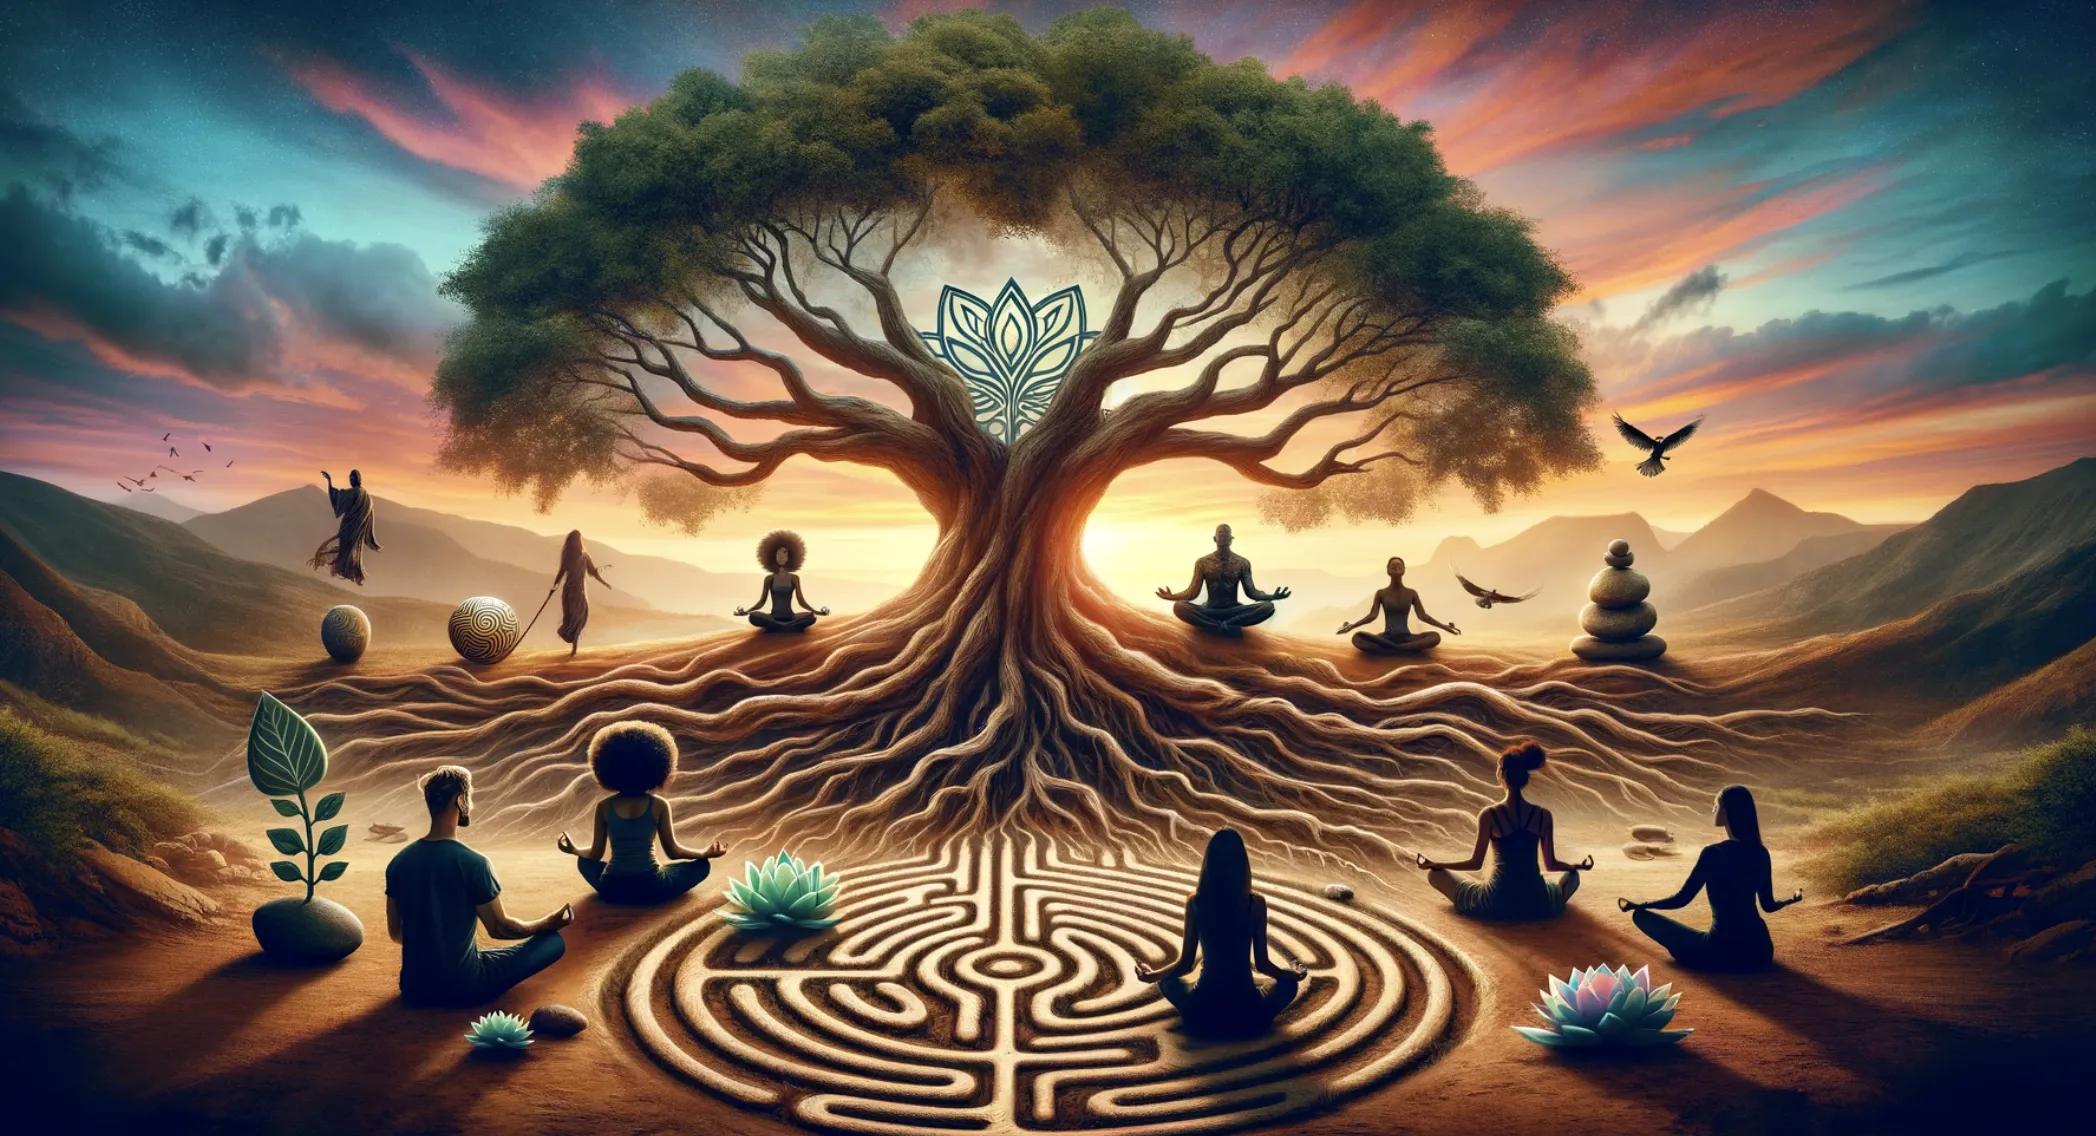 photo depicting spiritual growth with a large tree any people mediting beneath it